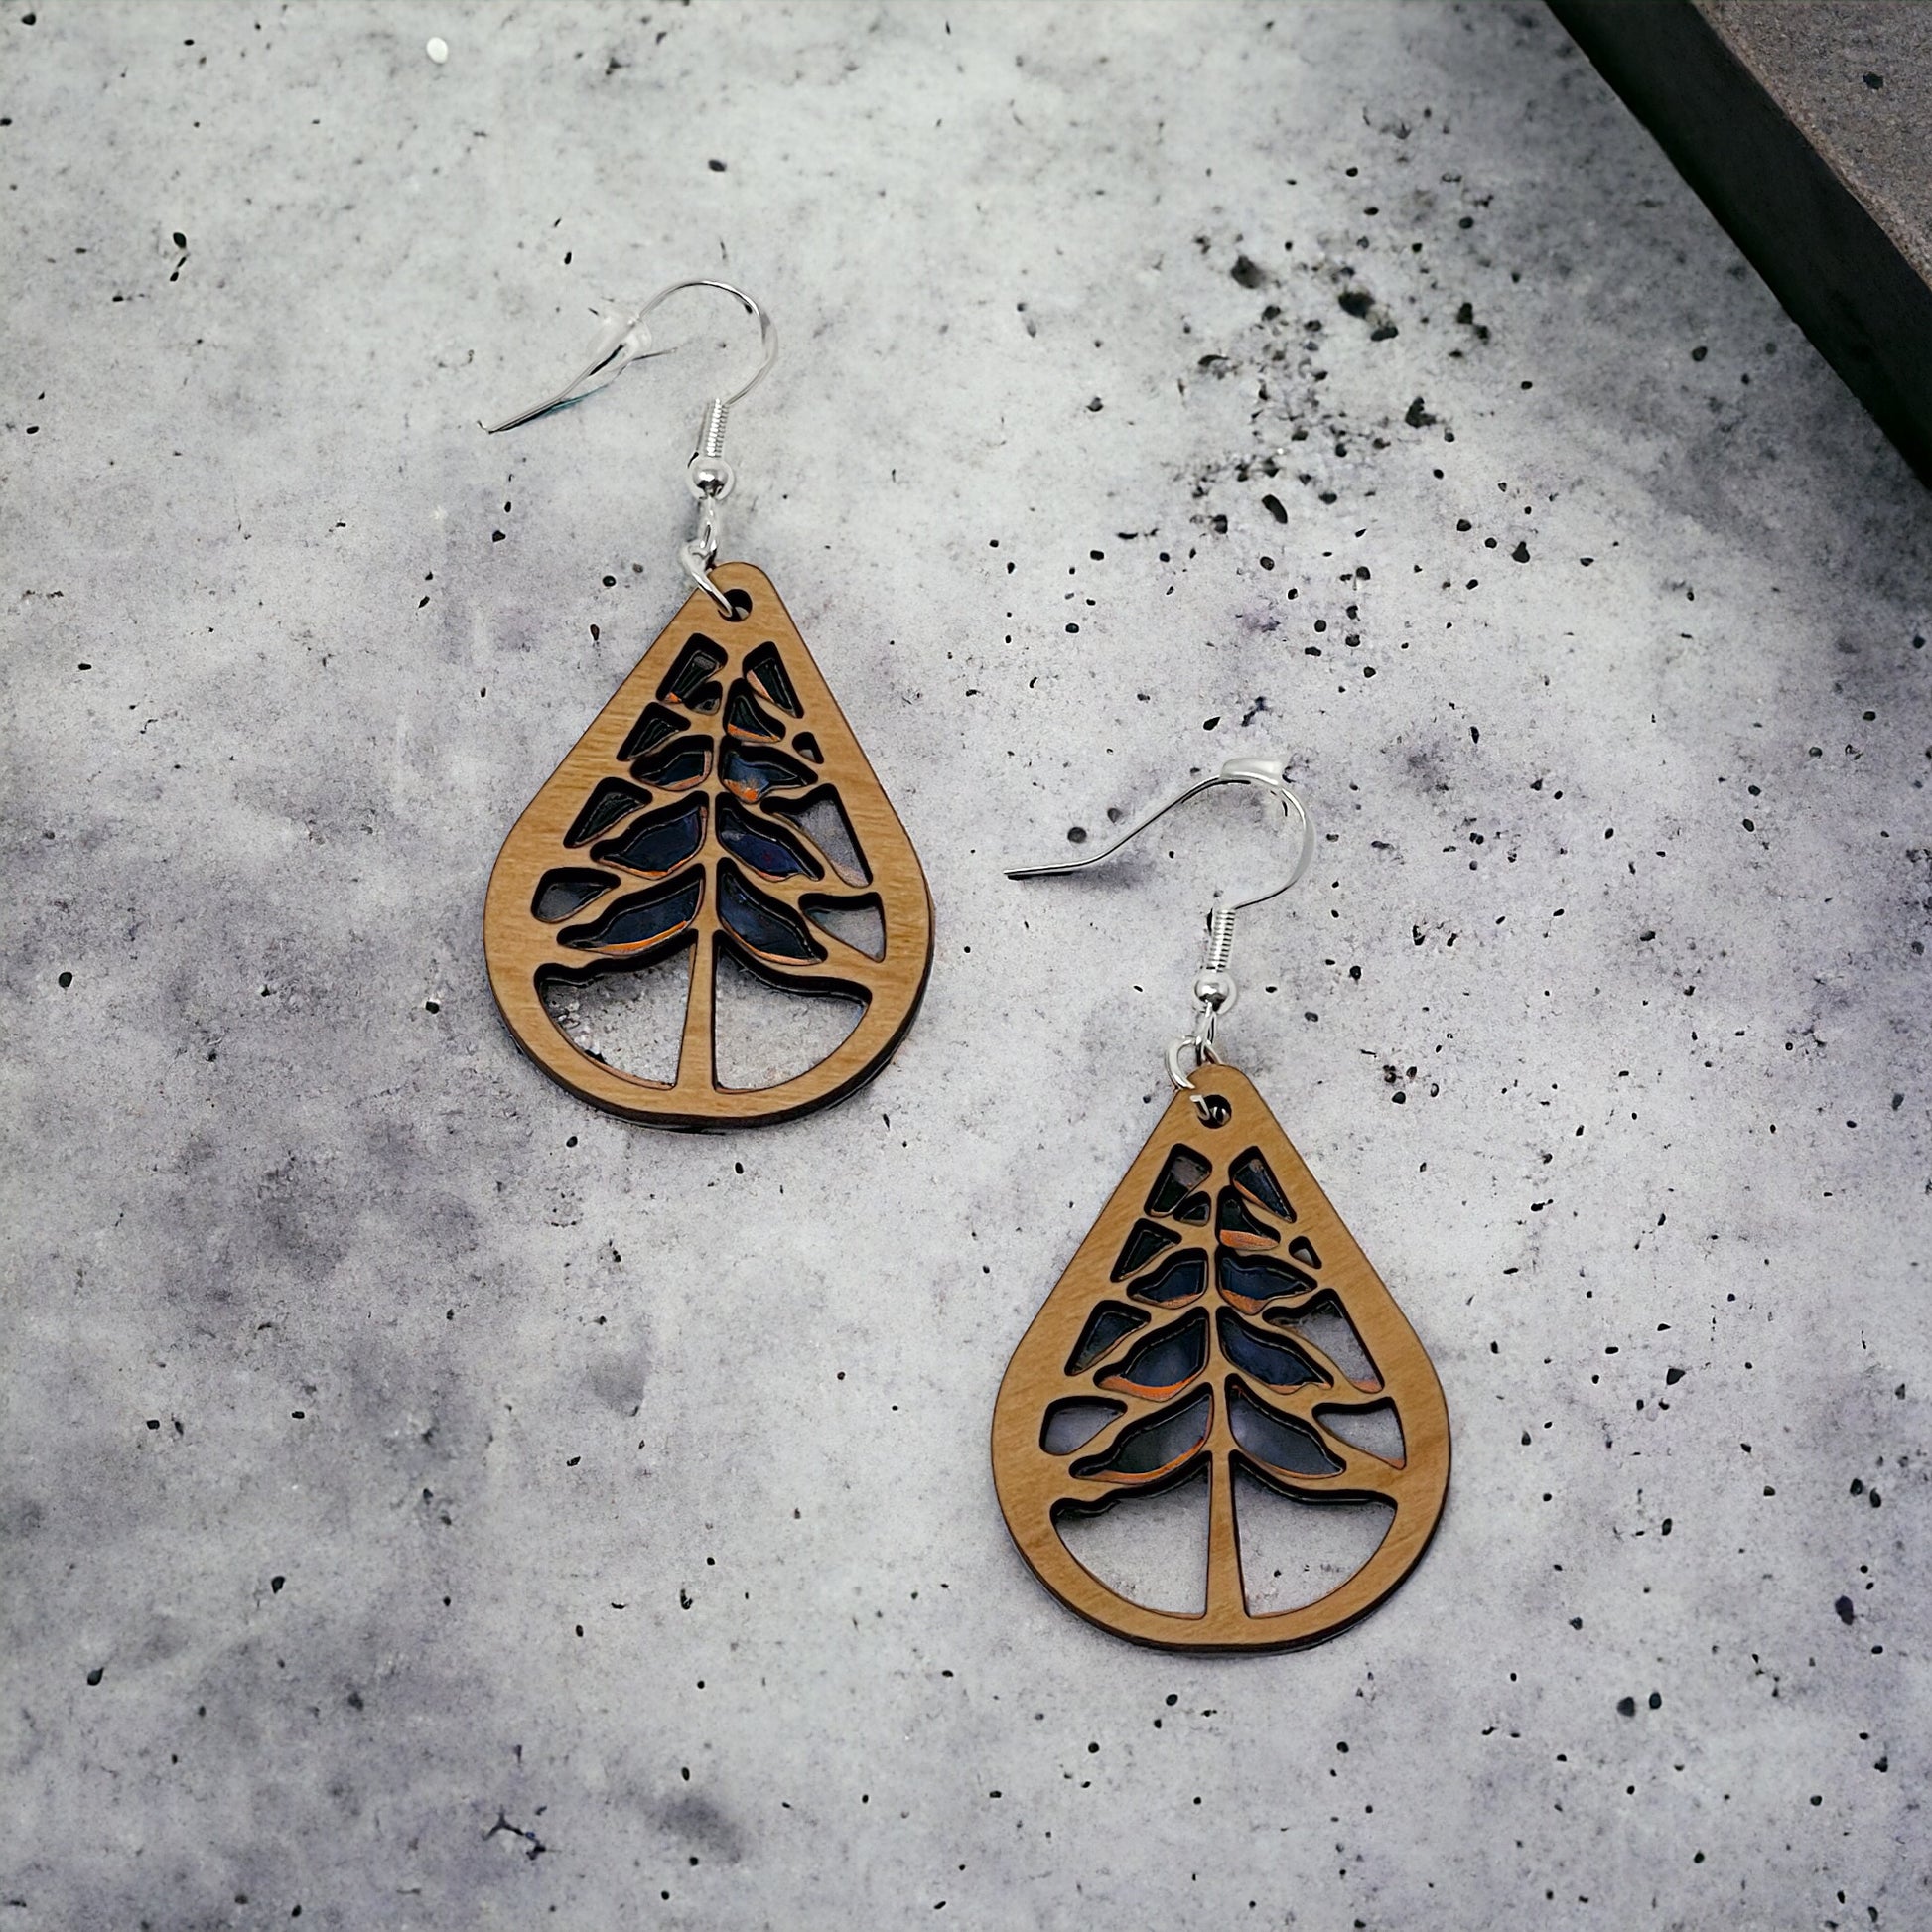 Teardrop Tree Earrings - Rustic Wood Dangle Earrings with a Whimsical Boho Touch, Cute Winter Holiday Accessories | Nature-Inspired Jewelry